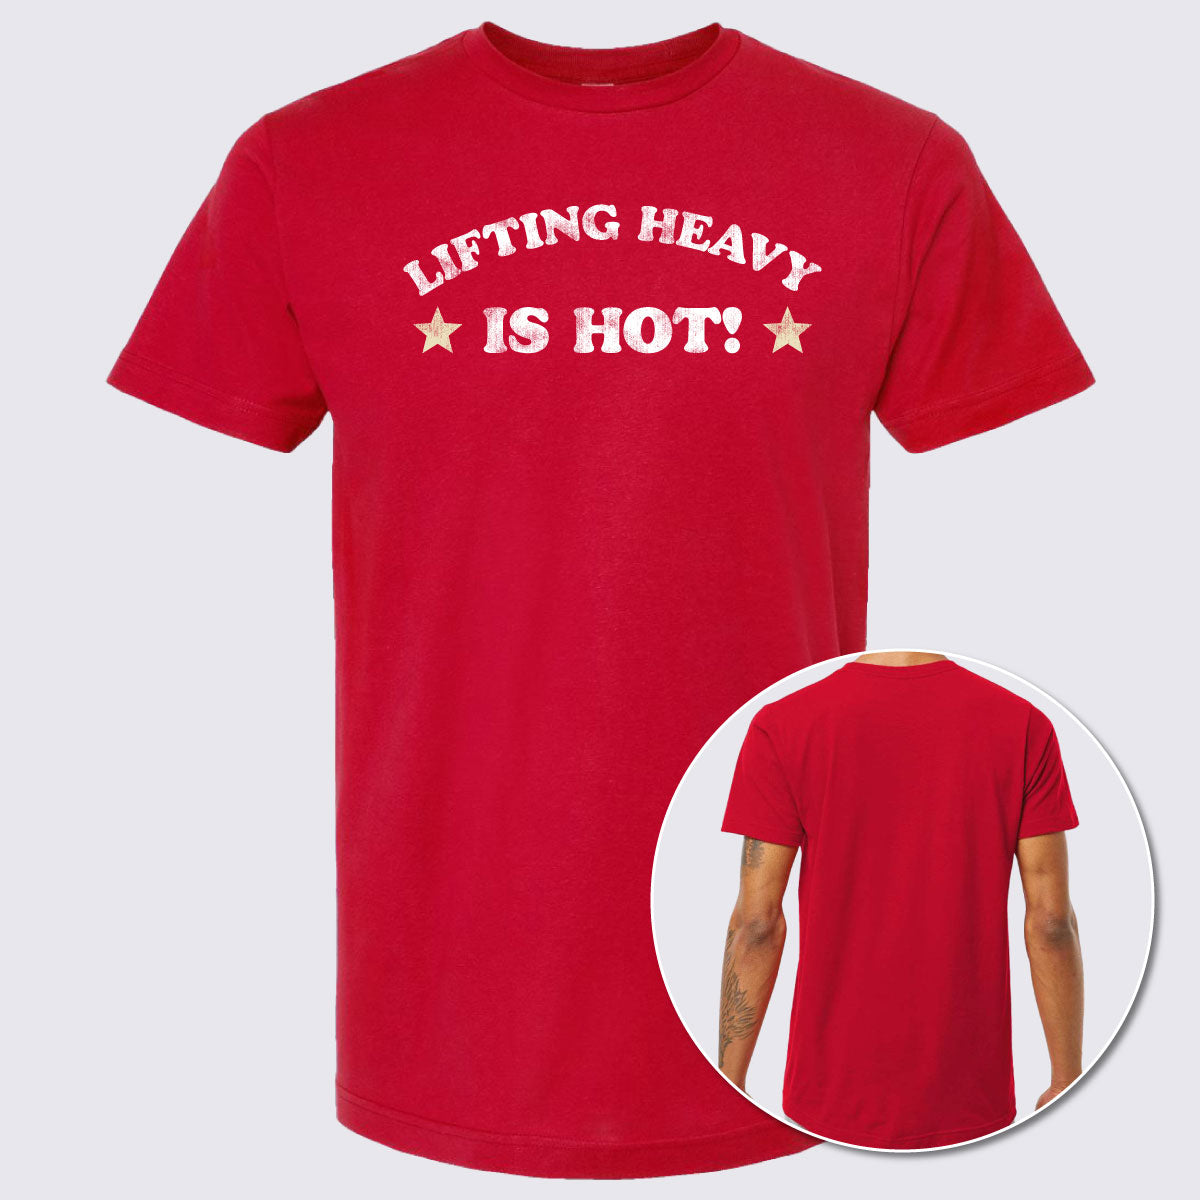 Lifting Heavy is Hot Unisex Fine Jersey T-Shirt